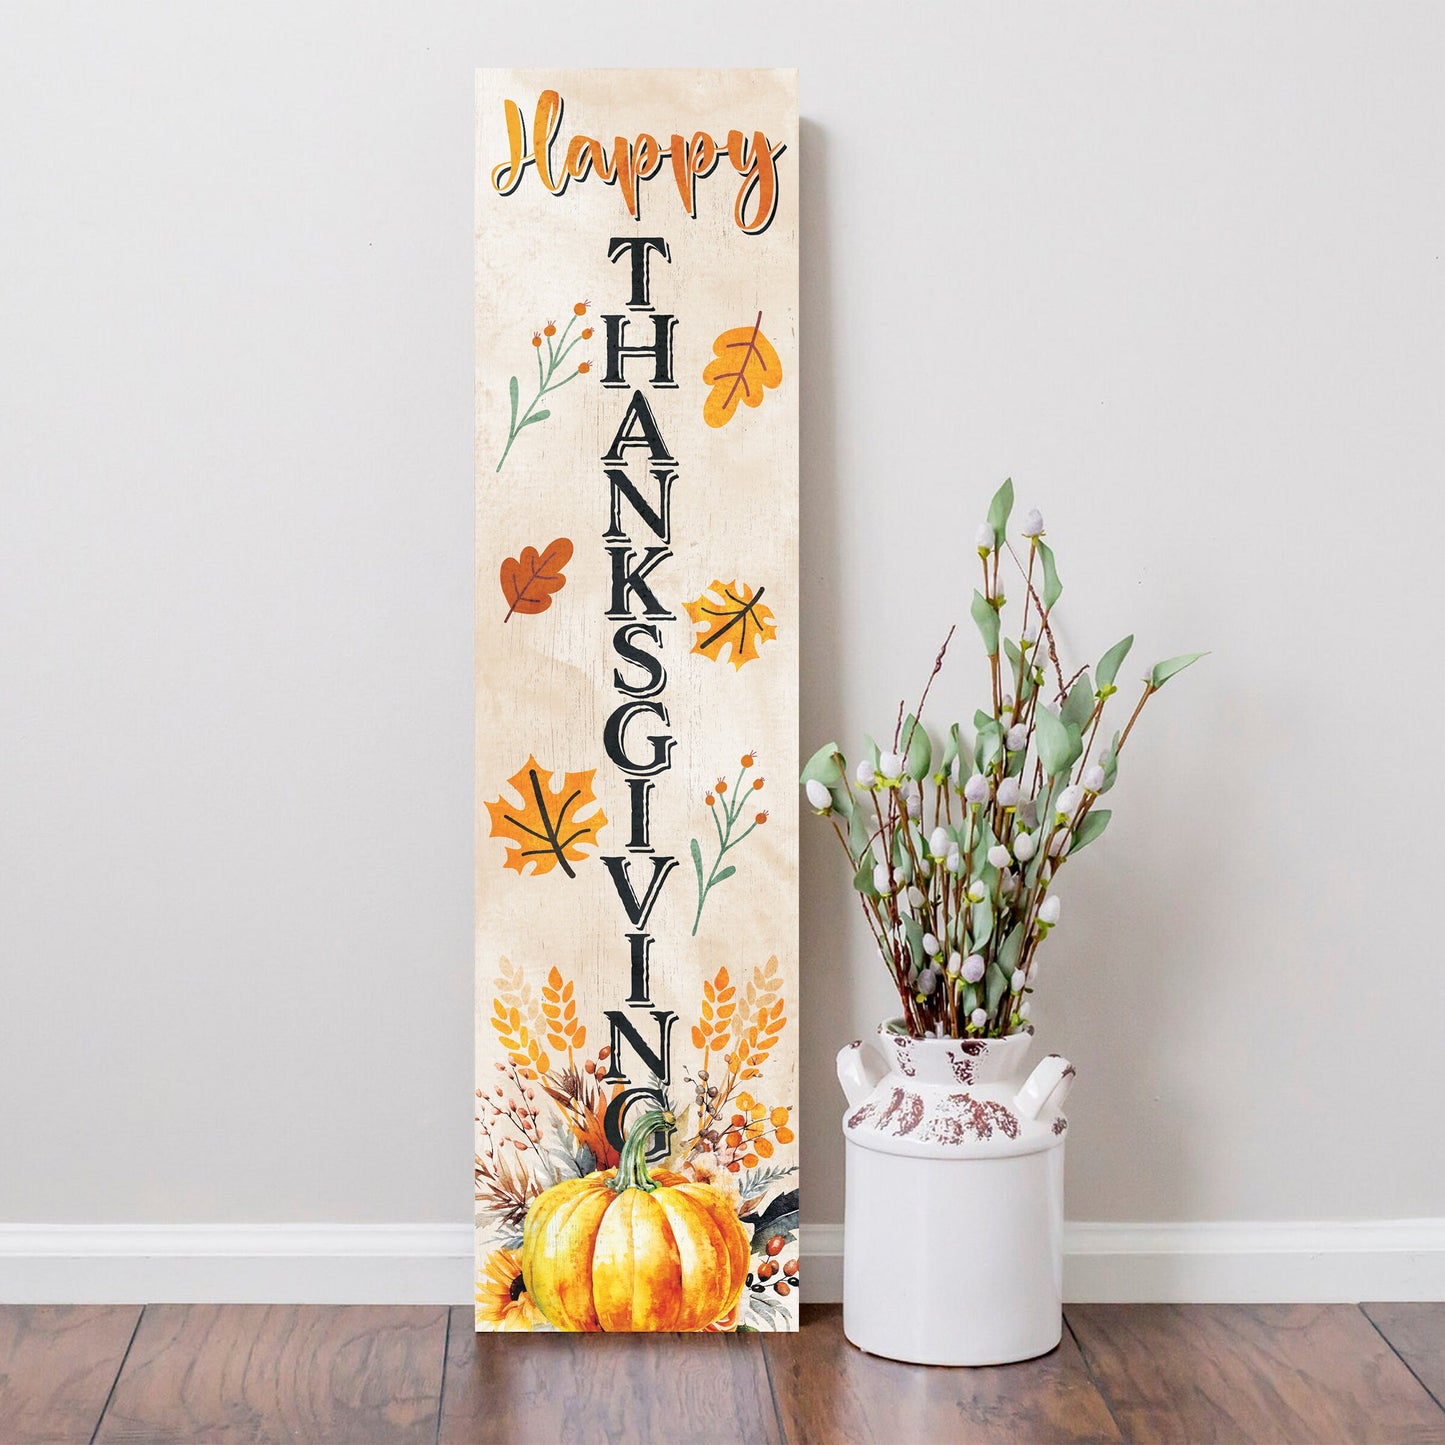 36in "Happy Thanksgiving" Fall Porch Sign - Rustic Harvest Decor for Front Door Display during Autumn Celebrations